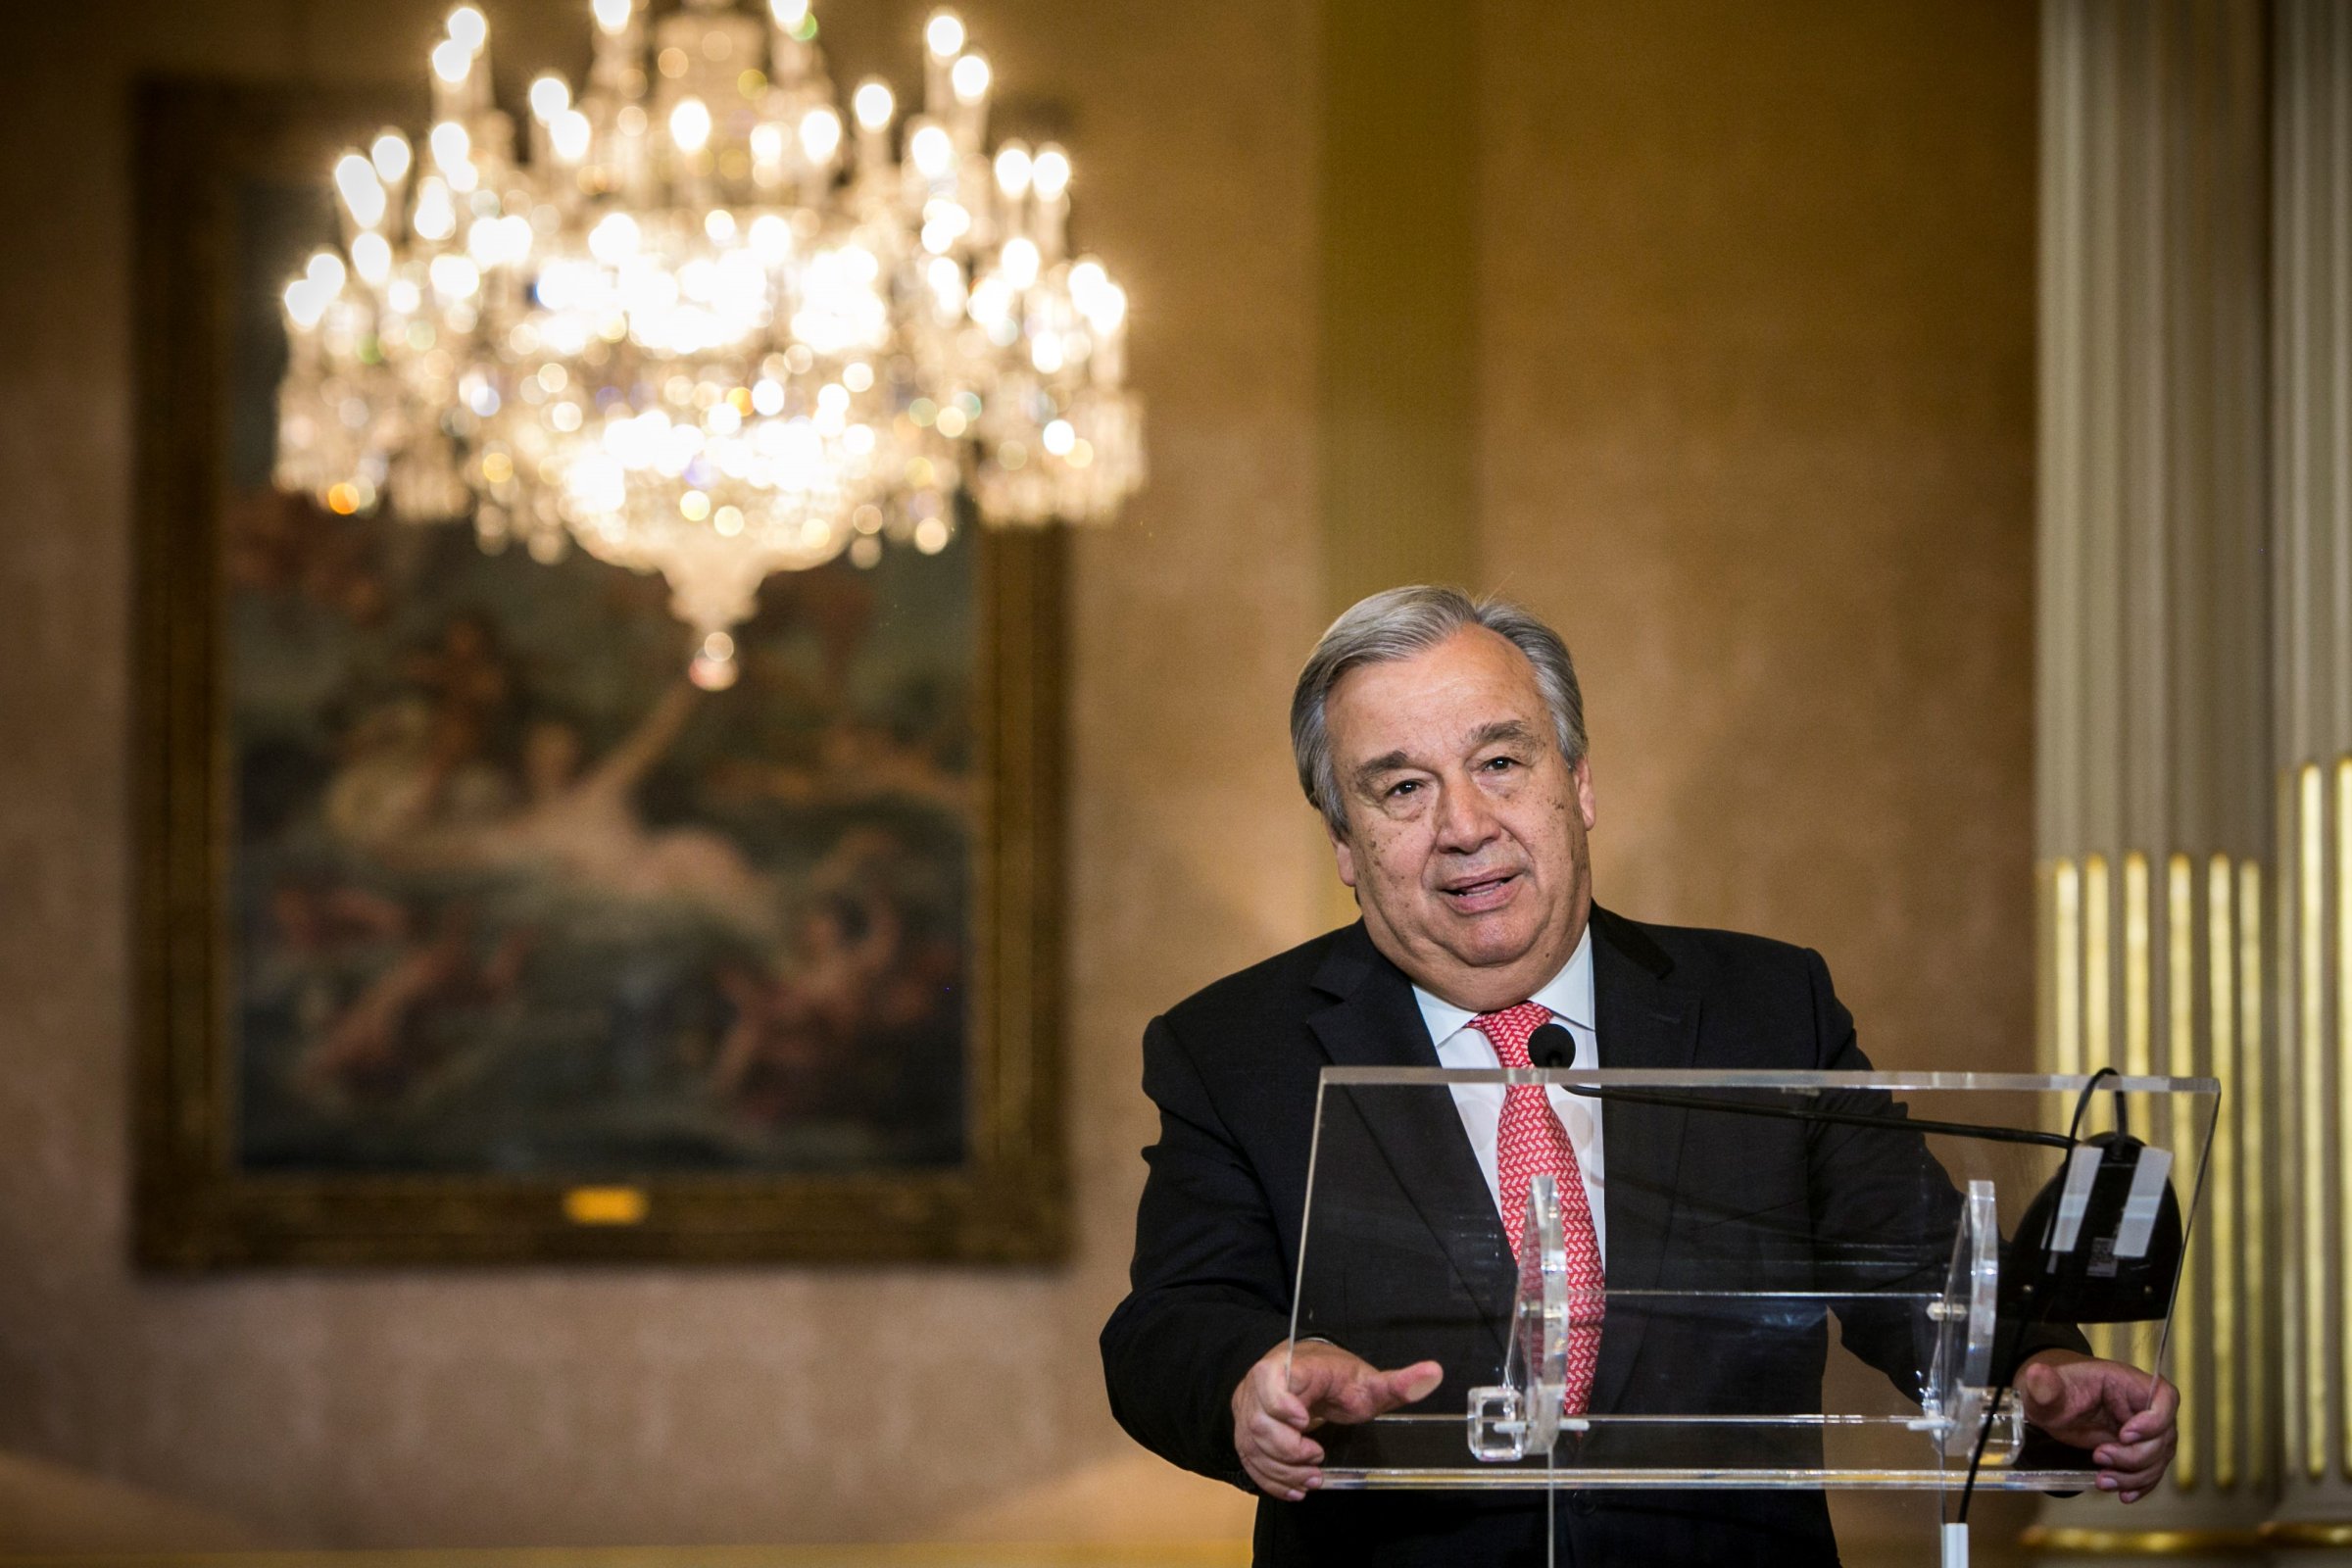 New appointed United Nations general secretary Antonio Guterres delivers a speech during a press conference in Lisbon, Portugal on October 6, 2016.